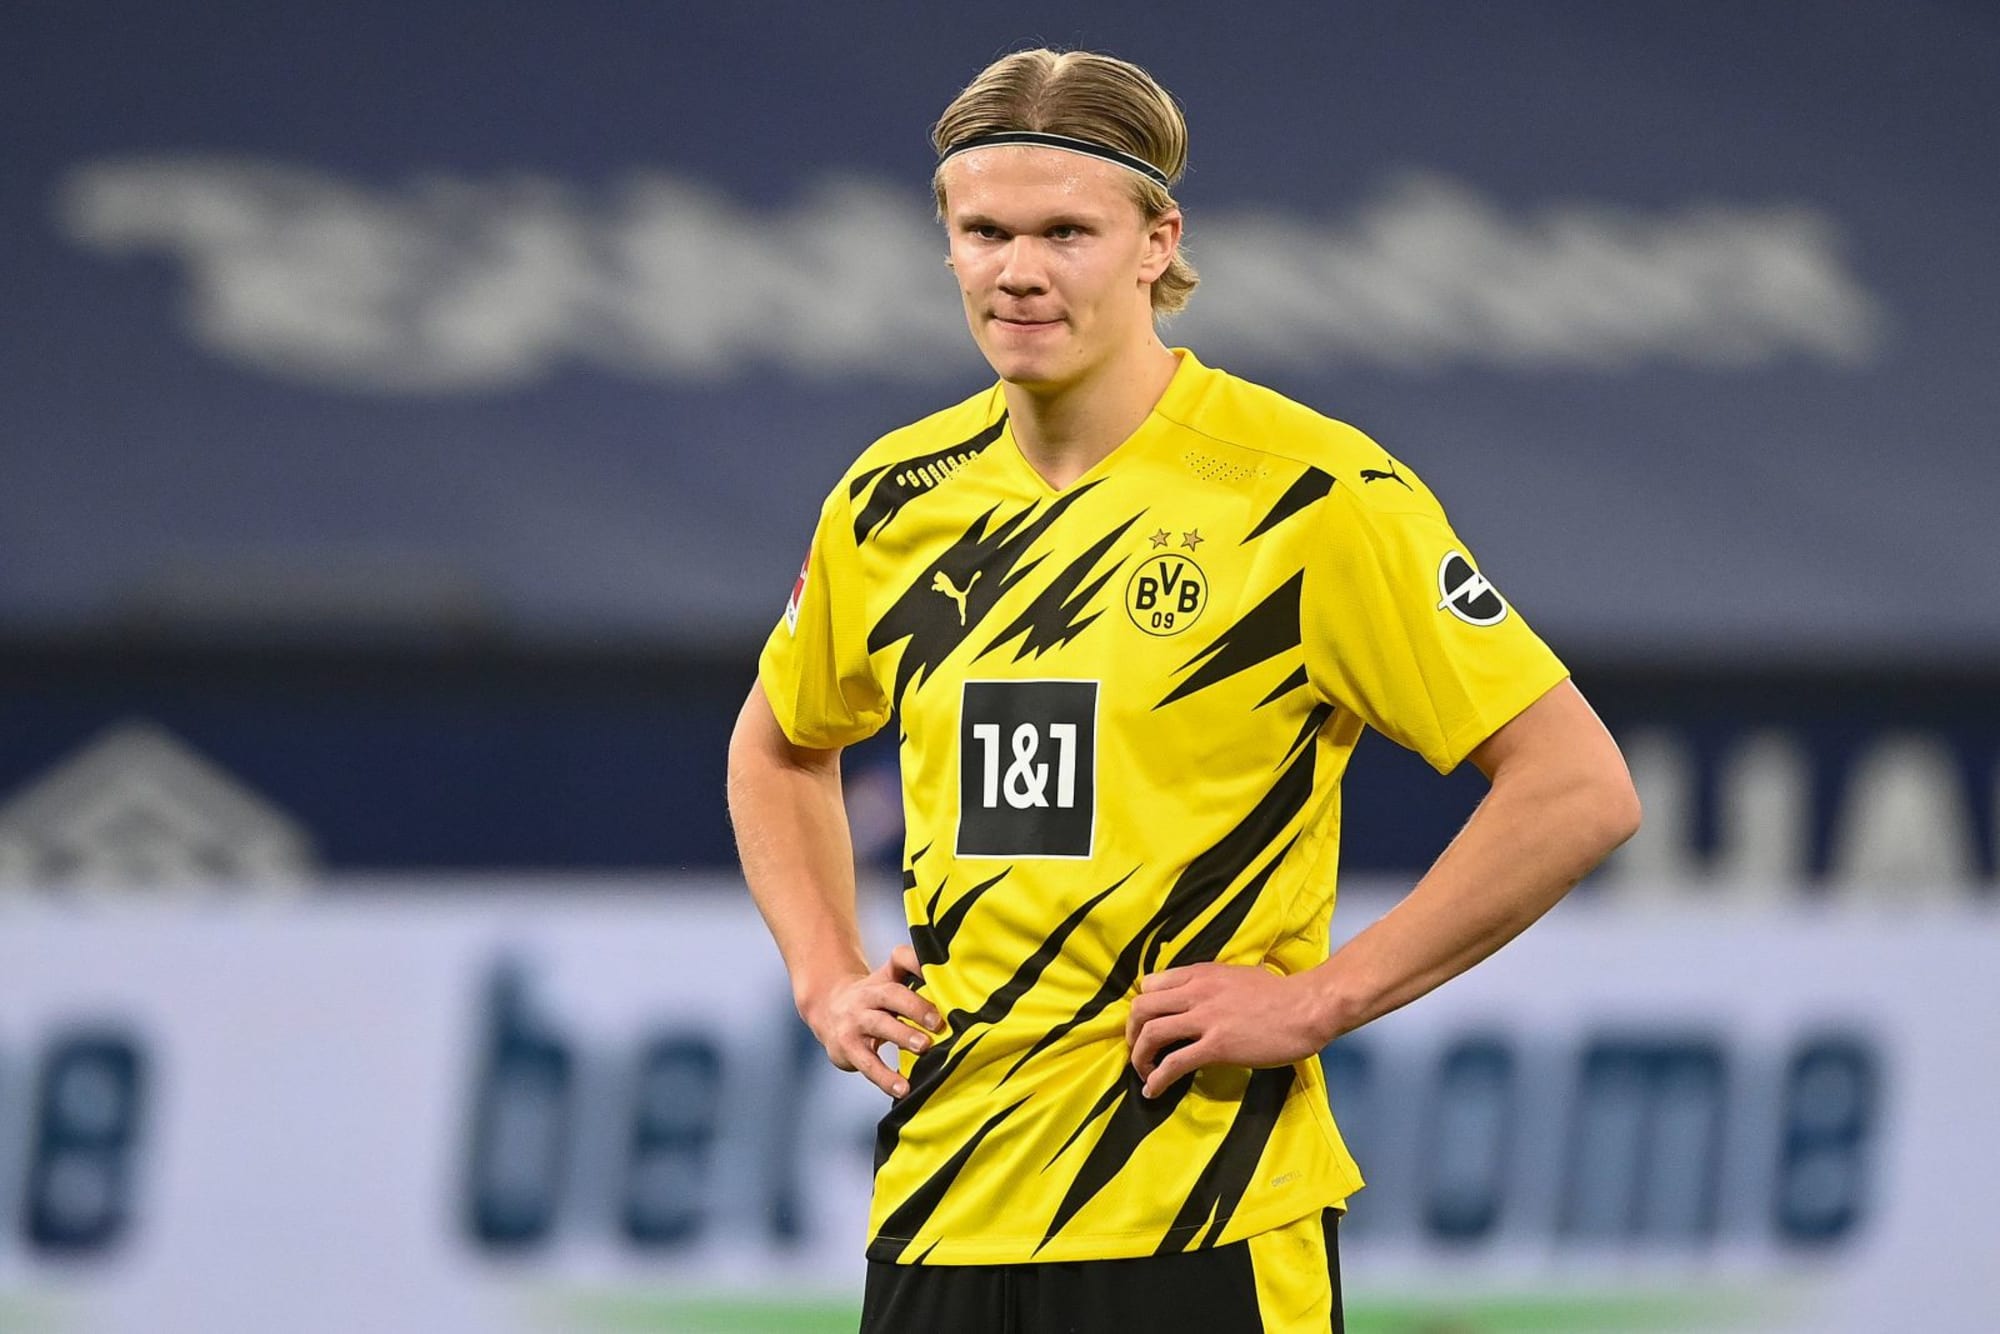  Erling Haaland, a Norwegian professional footballer who plays as a striker for Bundesliga club Borussia Dortmund and the Norway national team, is the subject of transfer rumors linking him to Real Madrid and Barcelona.